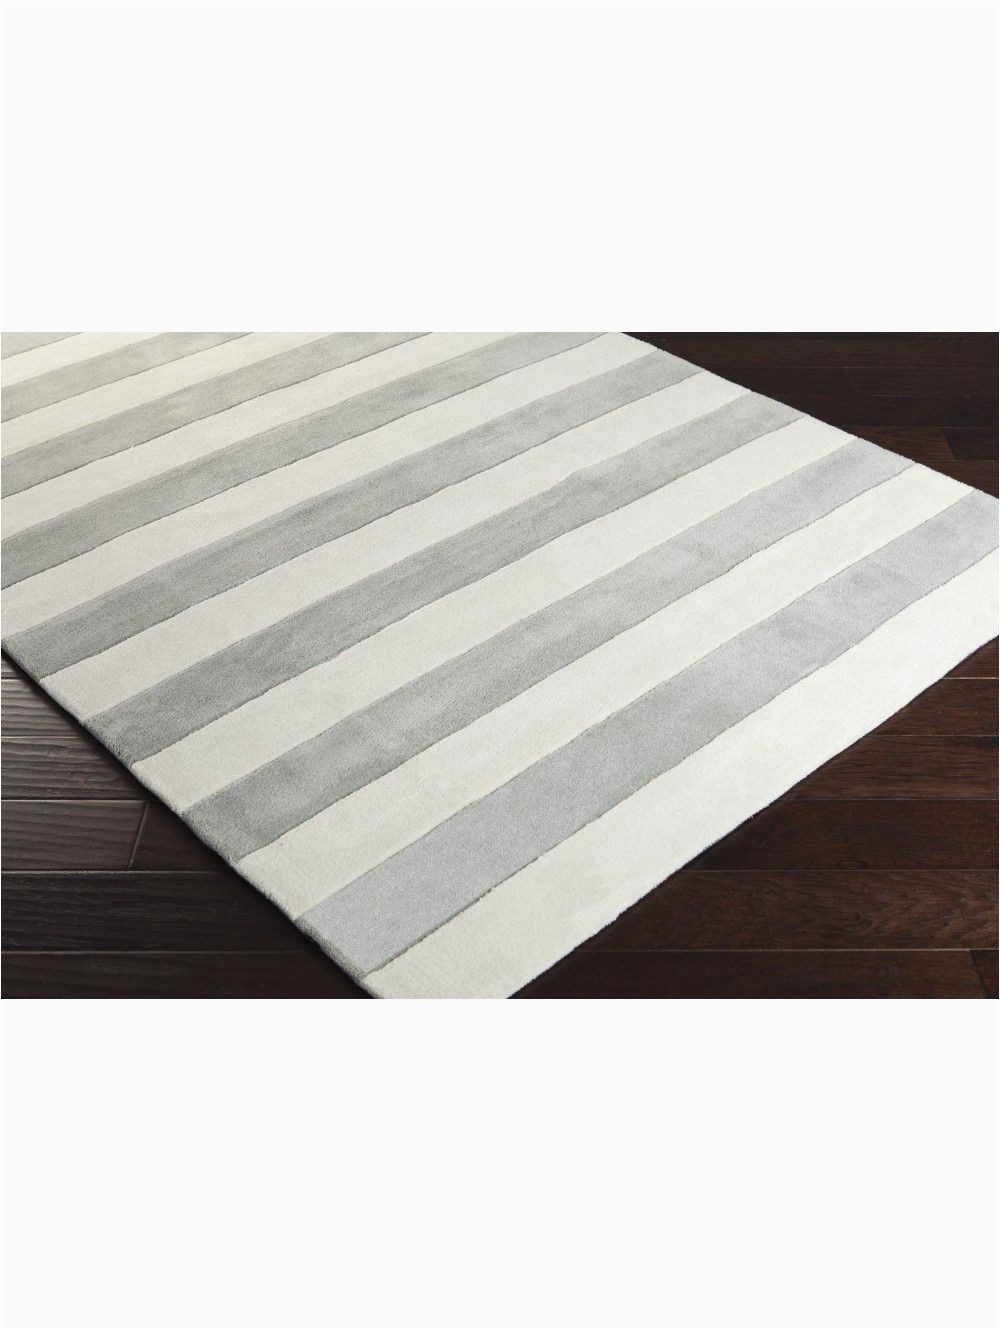 Gray and White Striped area Rug Miles Rug Silver